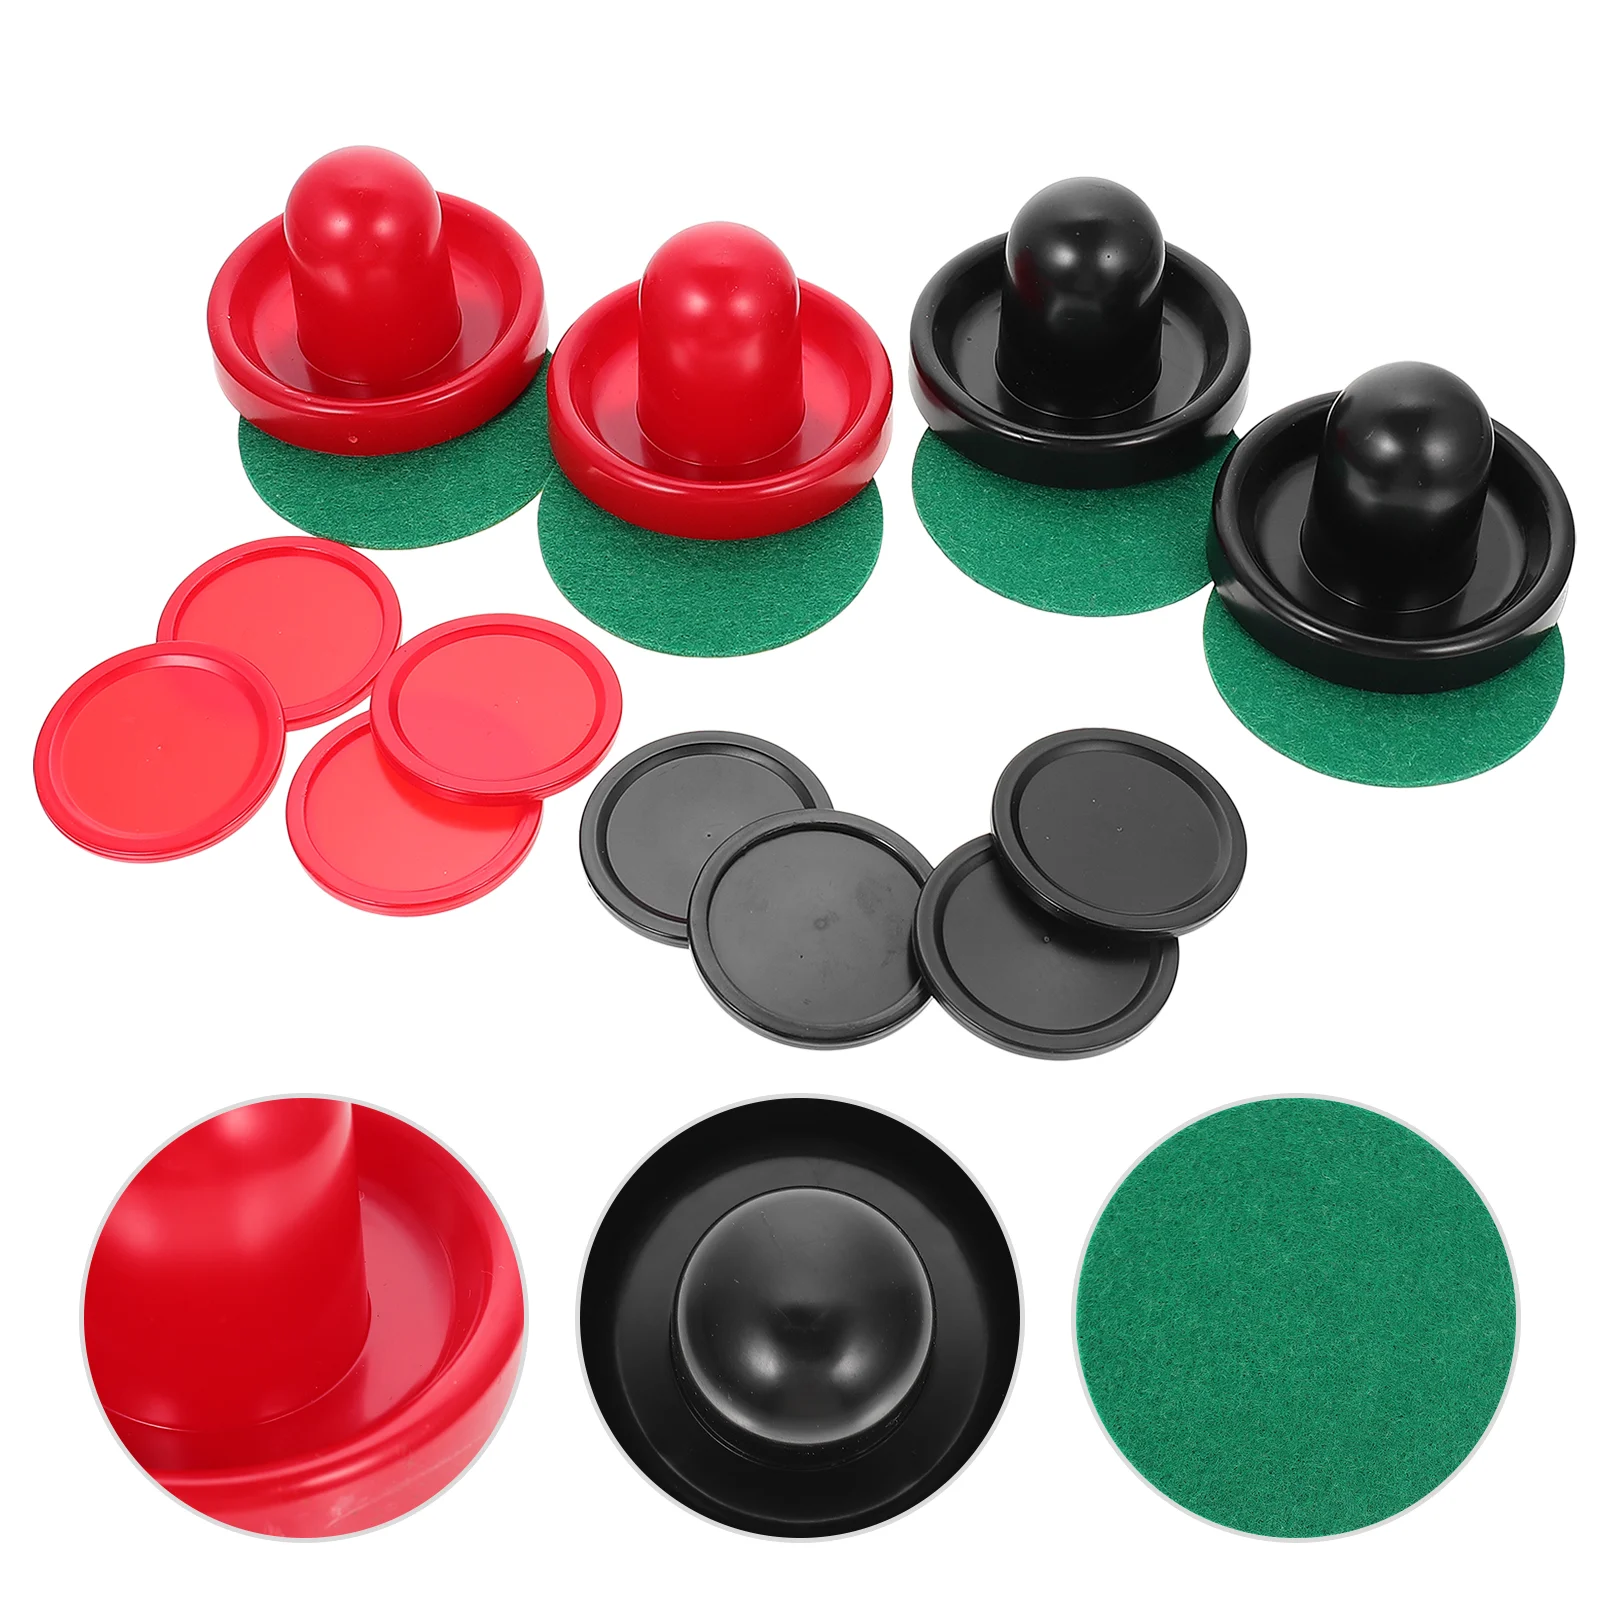 Ball Header Set Air Hockey Puck Game Accessories Parts Pucks Accessory Pushers Plastic